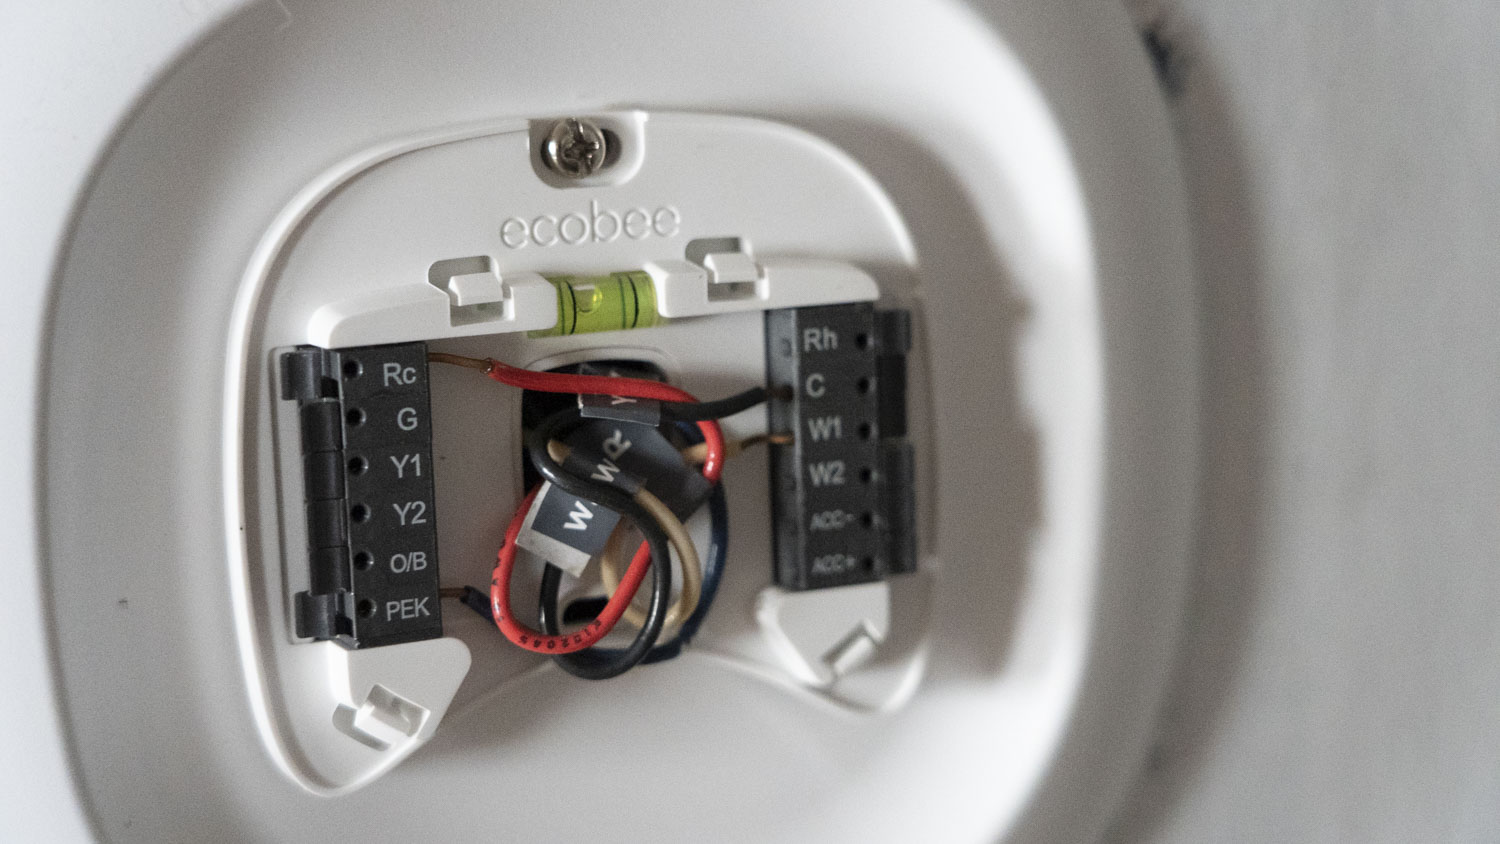 Ecobee provides lots of tiny labels. That PEK wire was originally the Y1 wired until I connected the power adaptor inside my air handler/furnace. (Photo: Alex Cranz/Gizmodo)